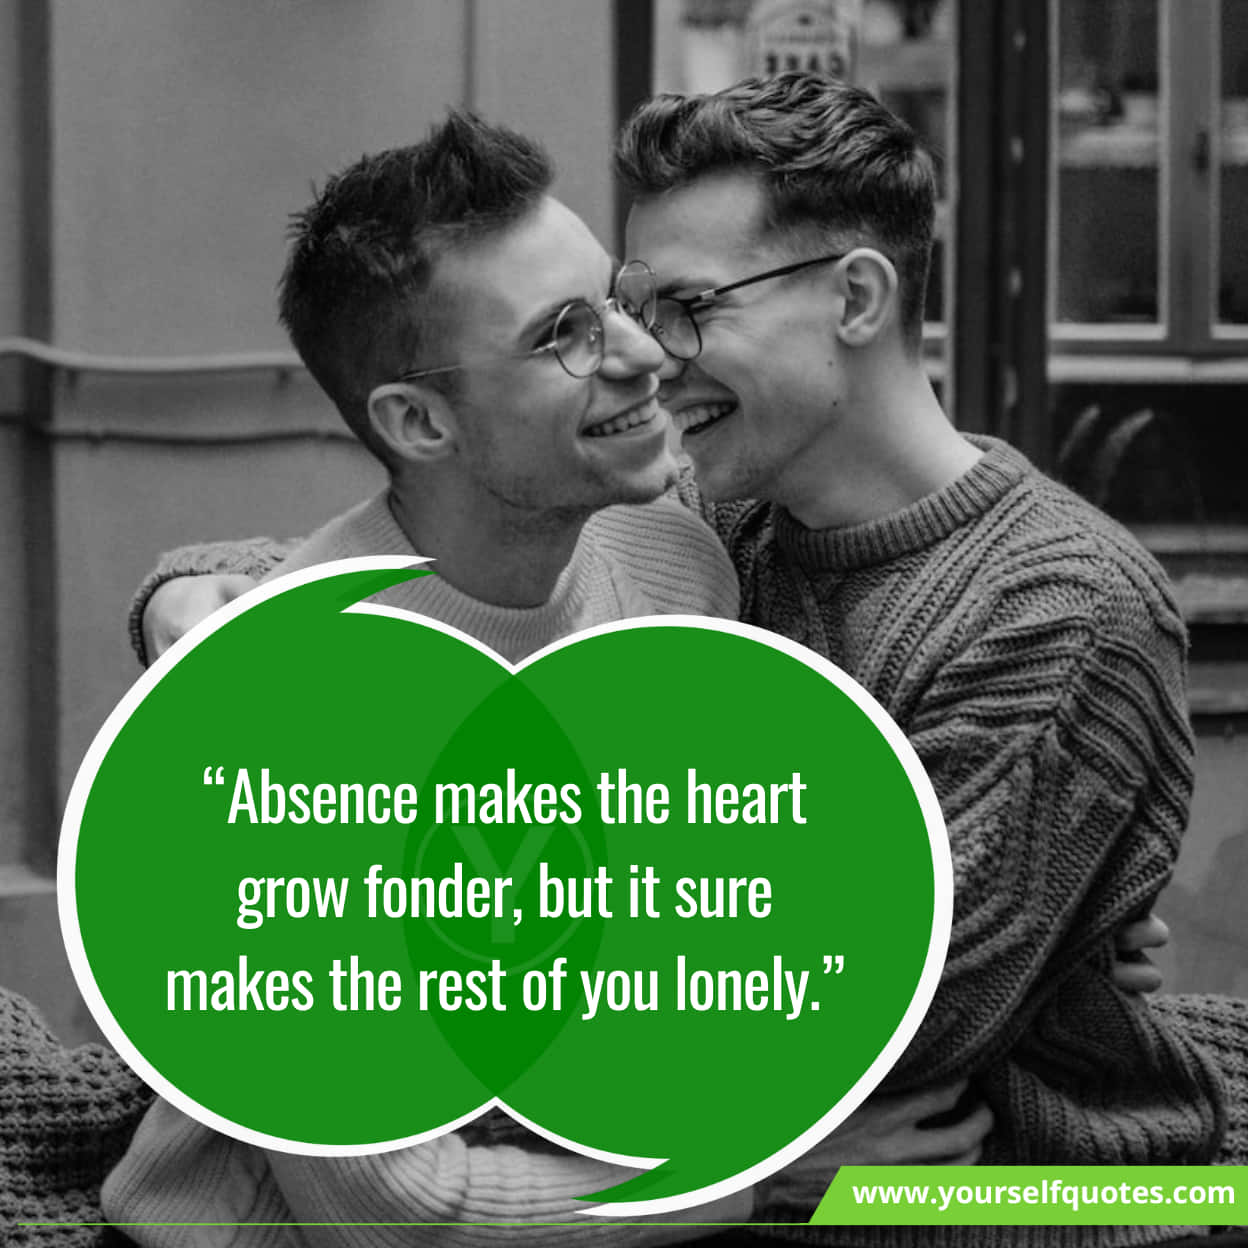 Funny Quotes About Long Distance Friendship